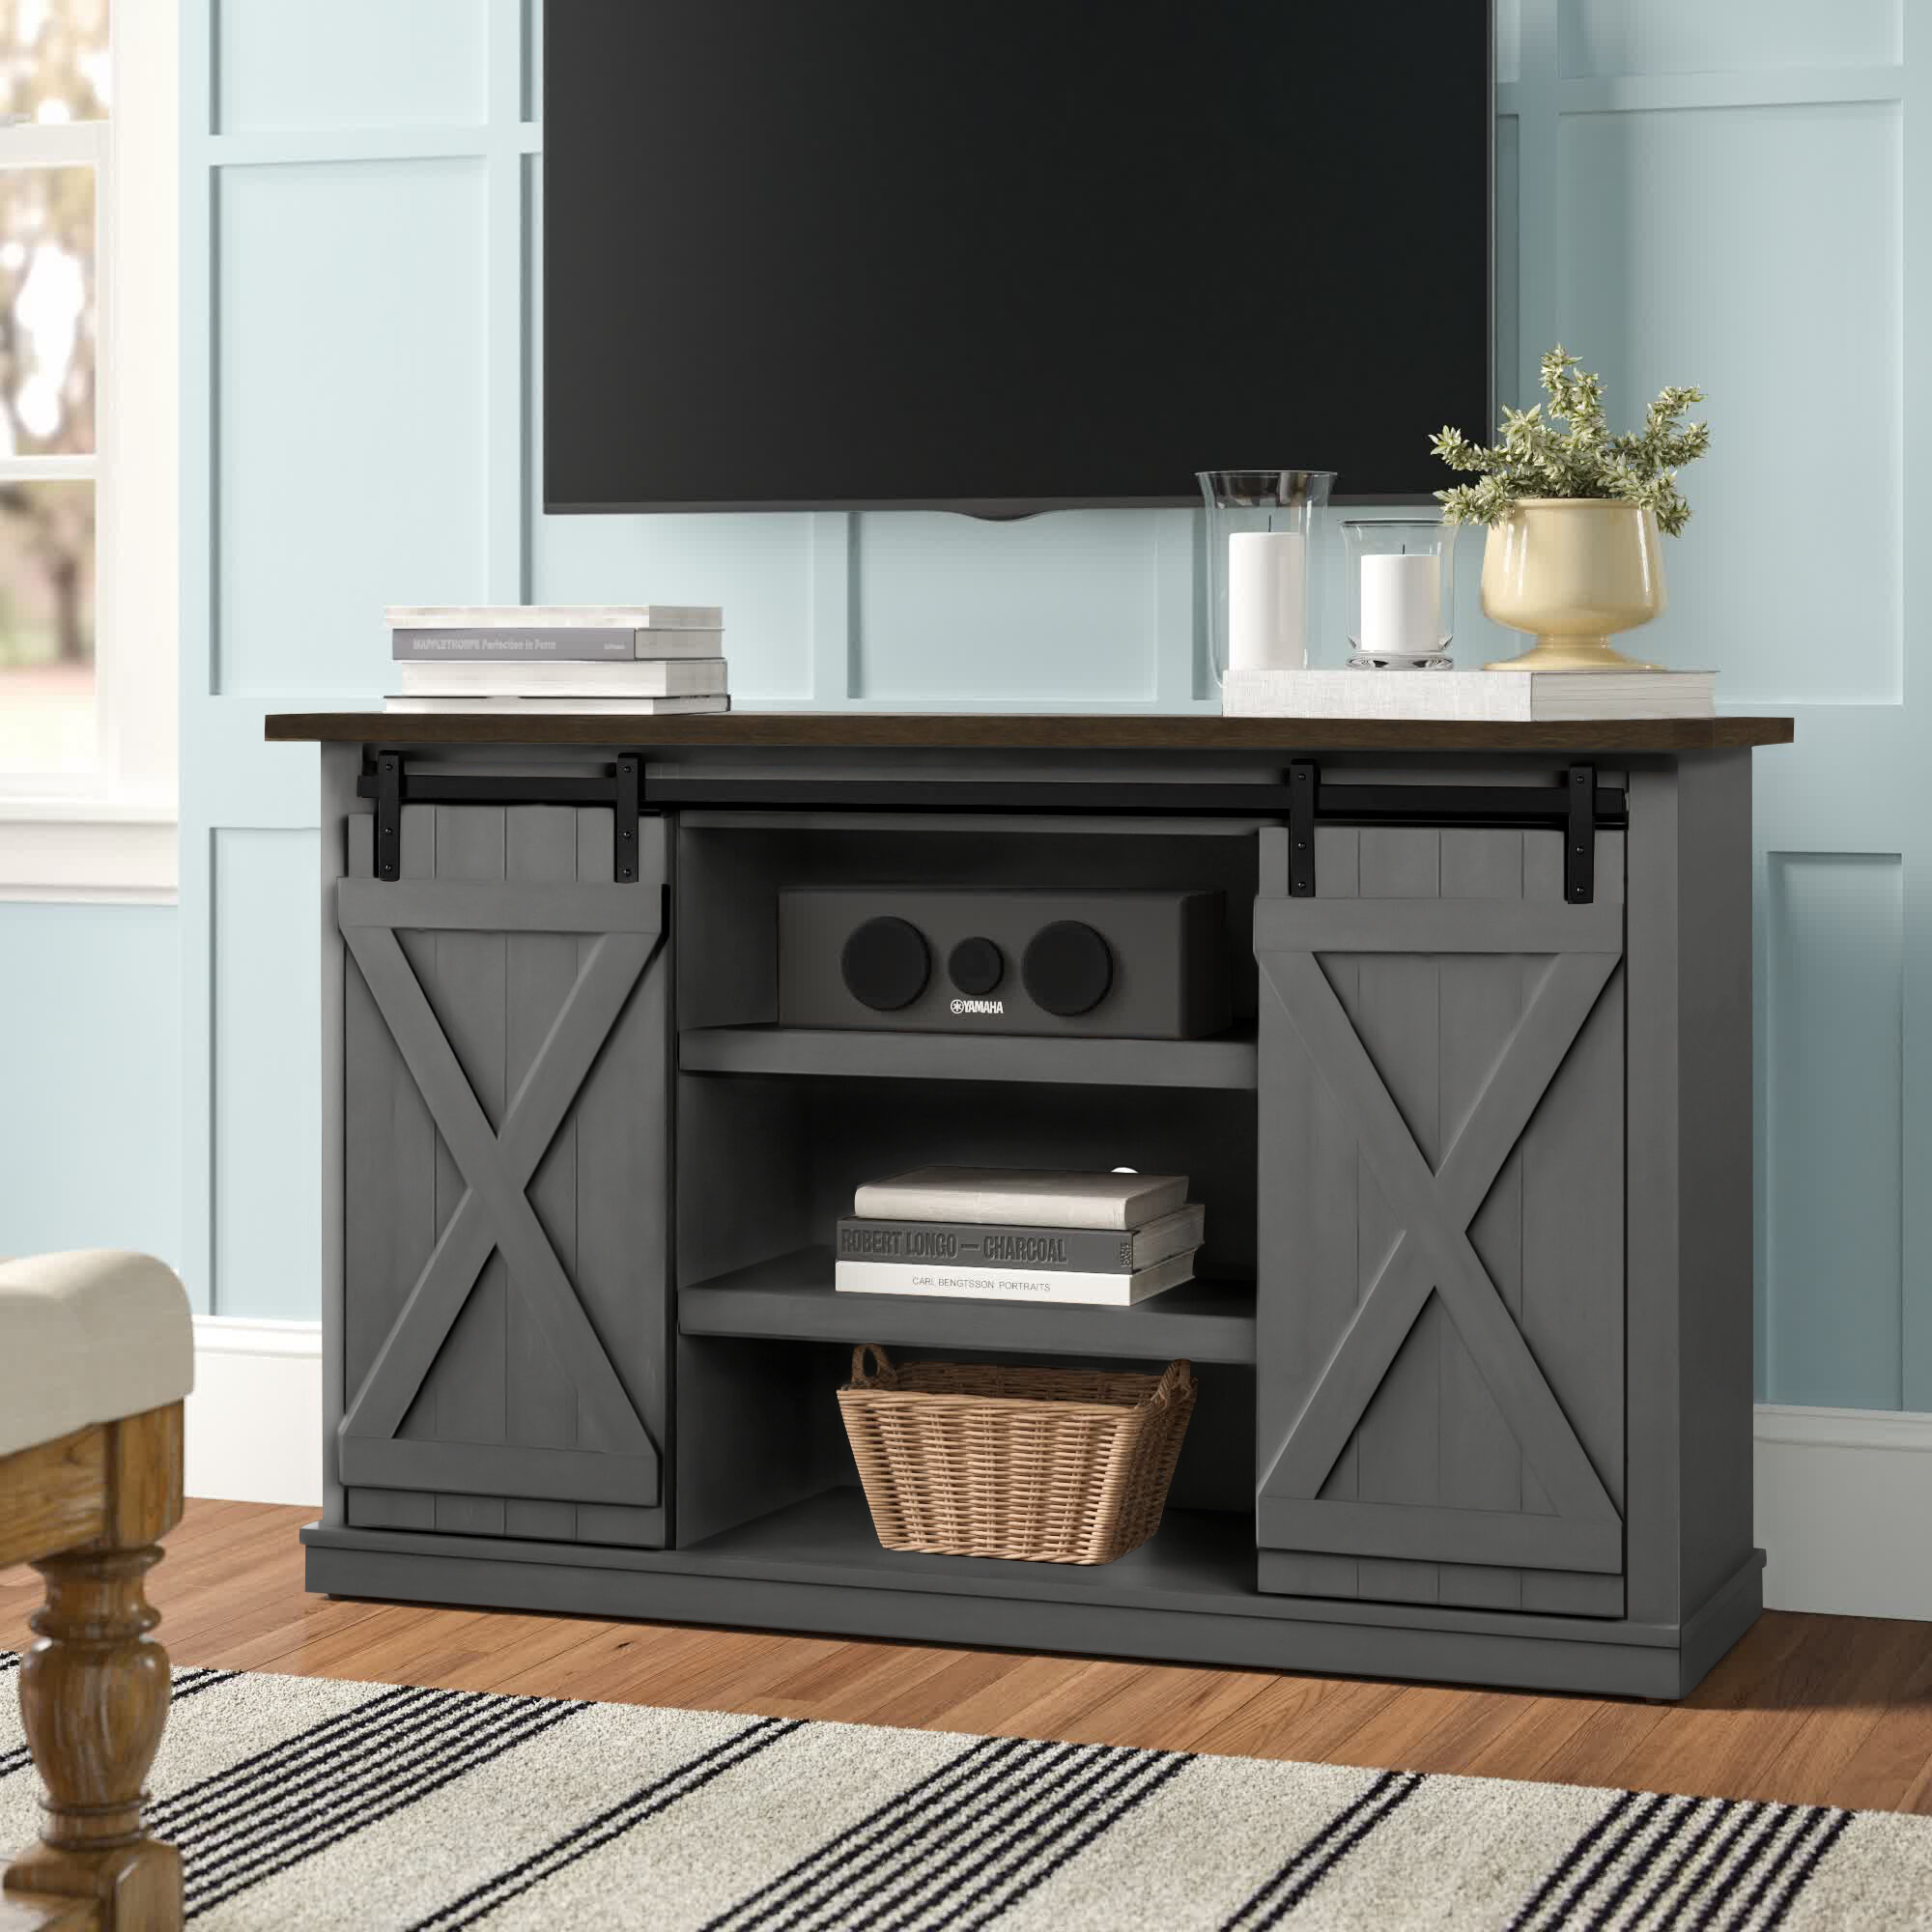 Crescent Solid Oak Dining Room Furniture Small Storage Sideboard